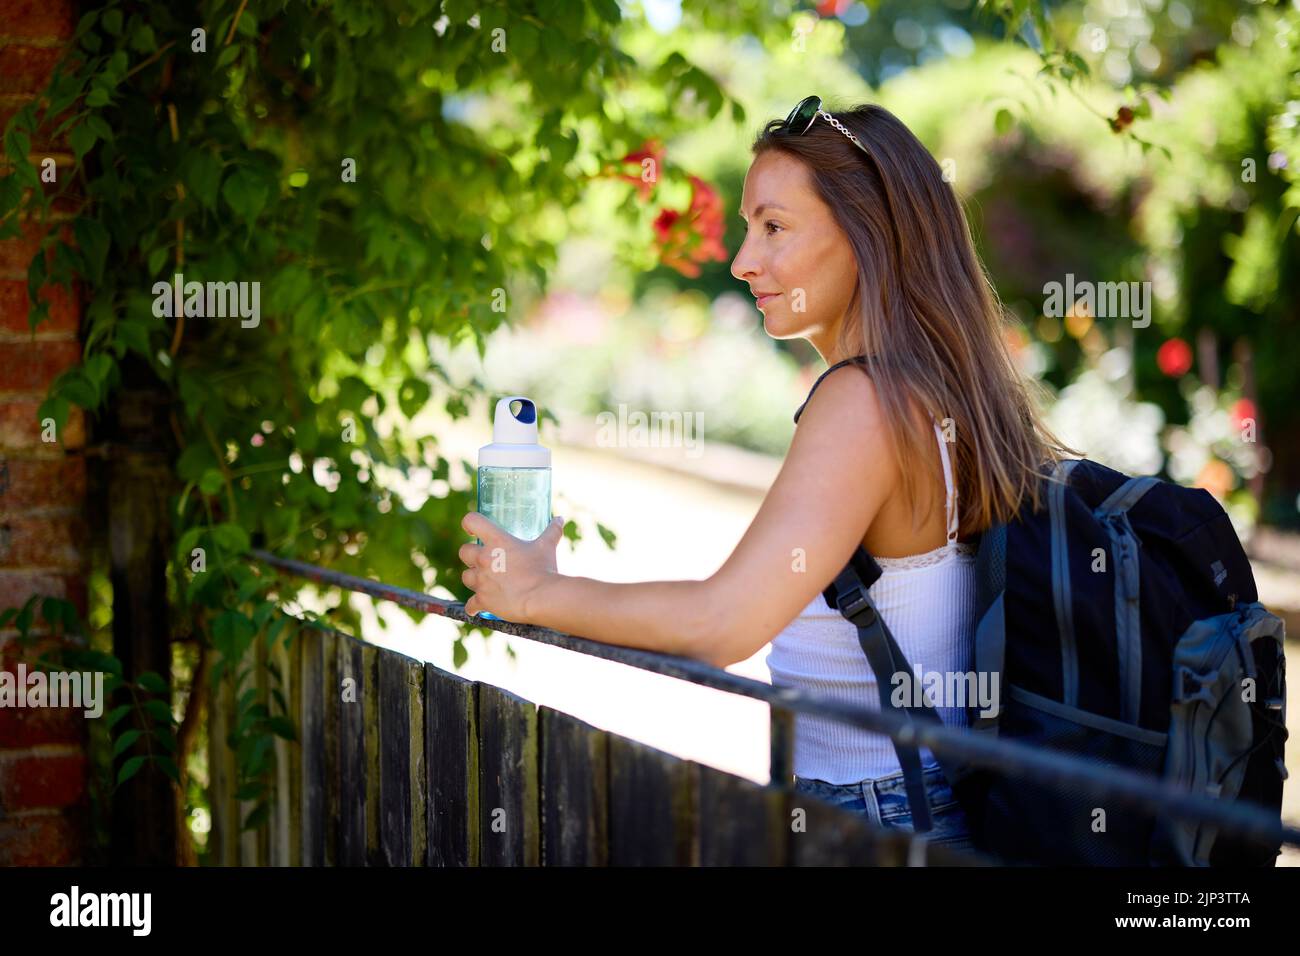 Woman relaxing outdoors with bottle of water Stock Photo